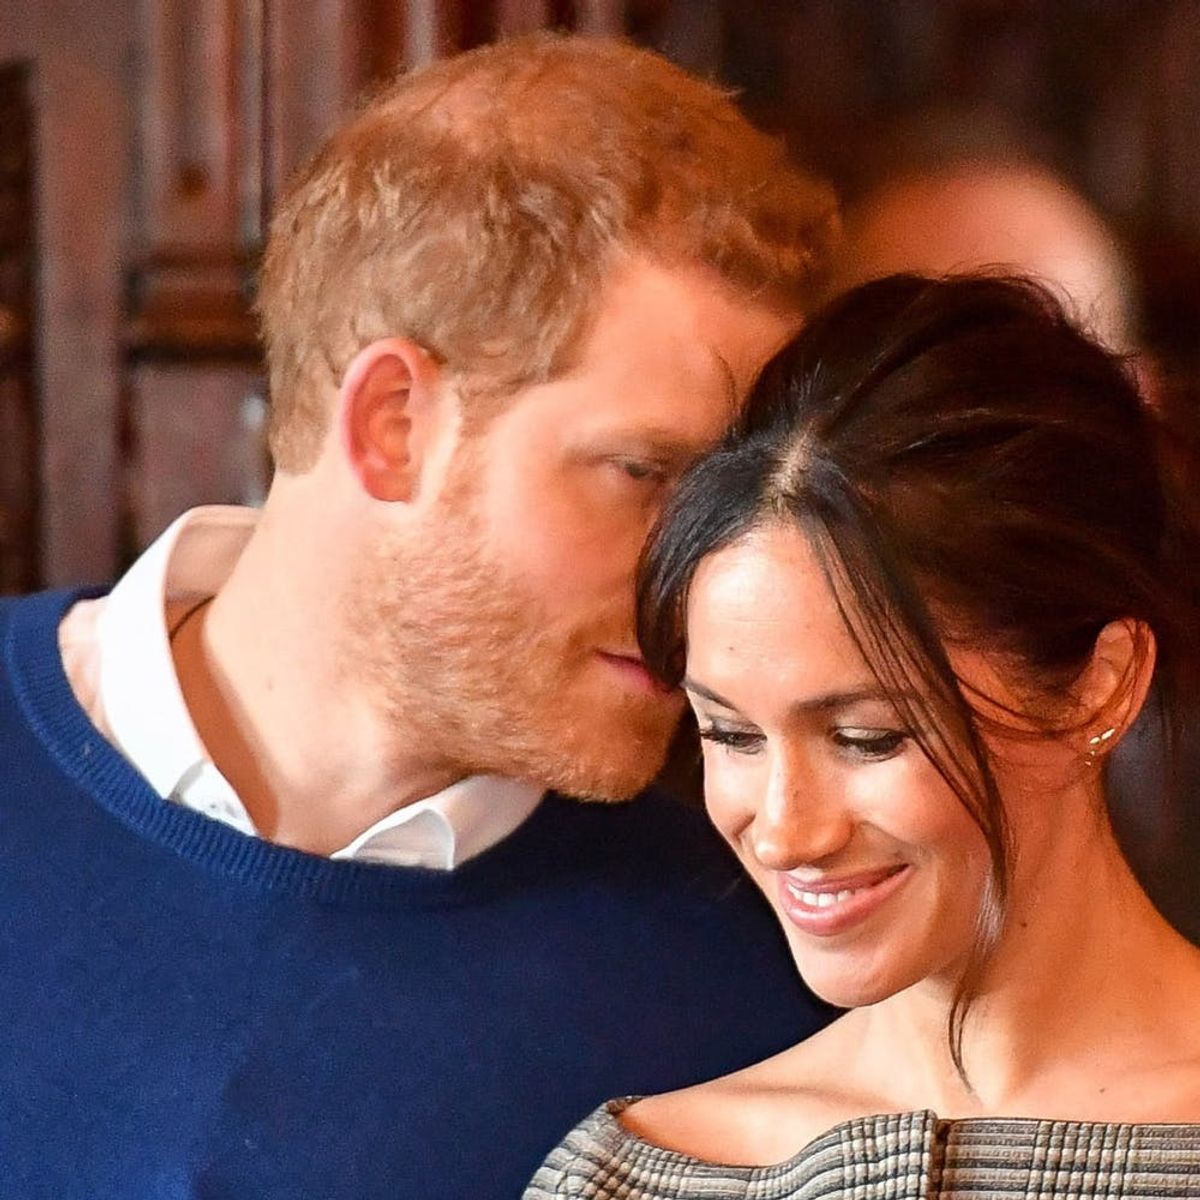 The Teaser Trailer for Prince Harry and Meghan Markle’s Lifetime Movie Will Make You Swoon